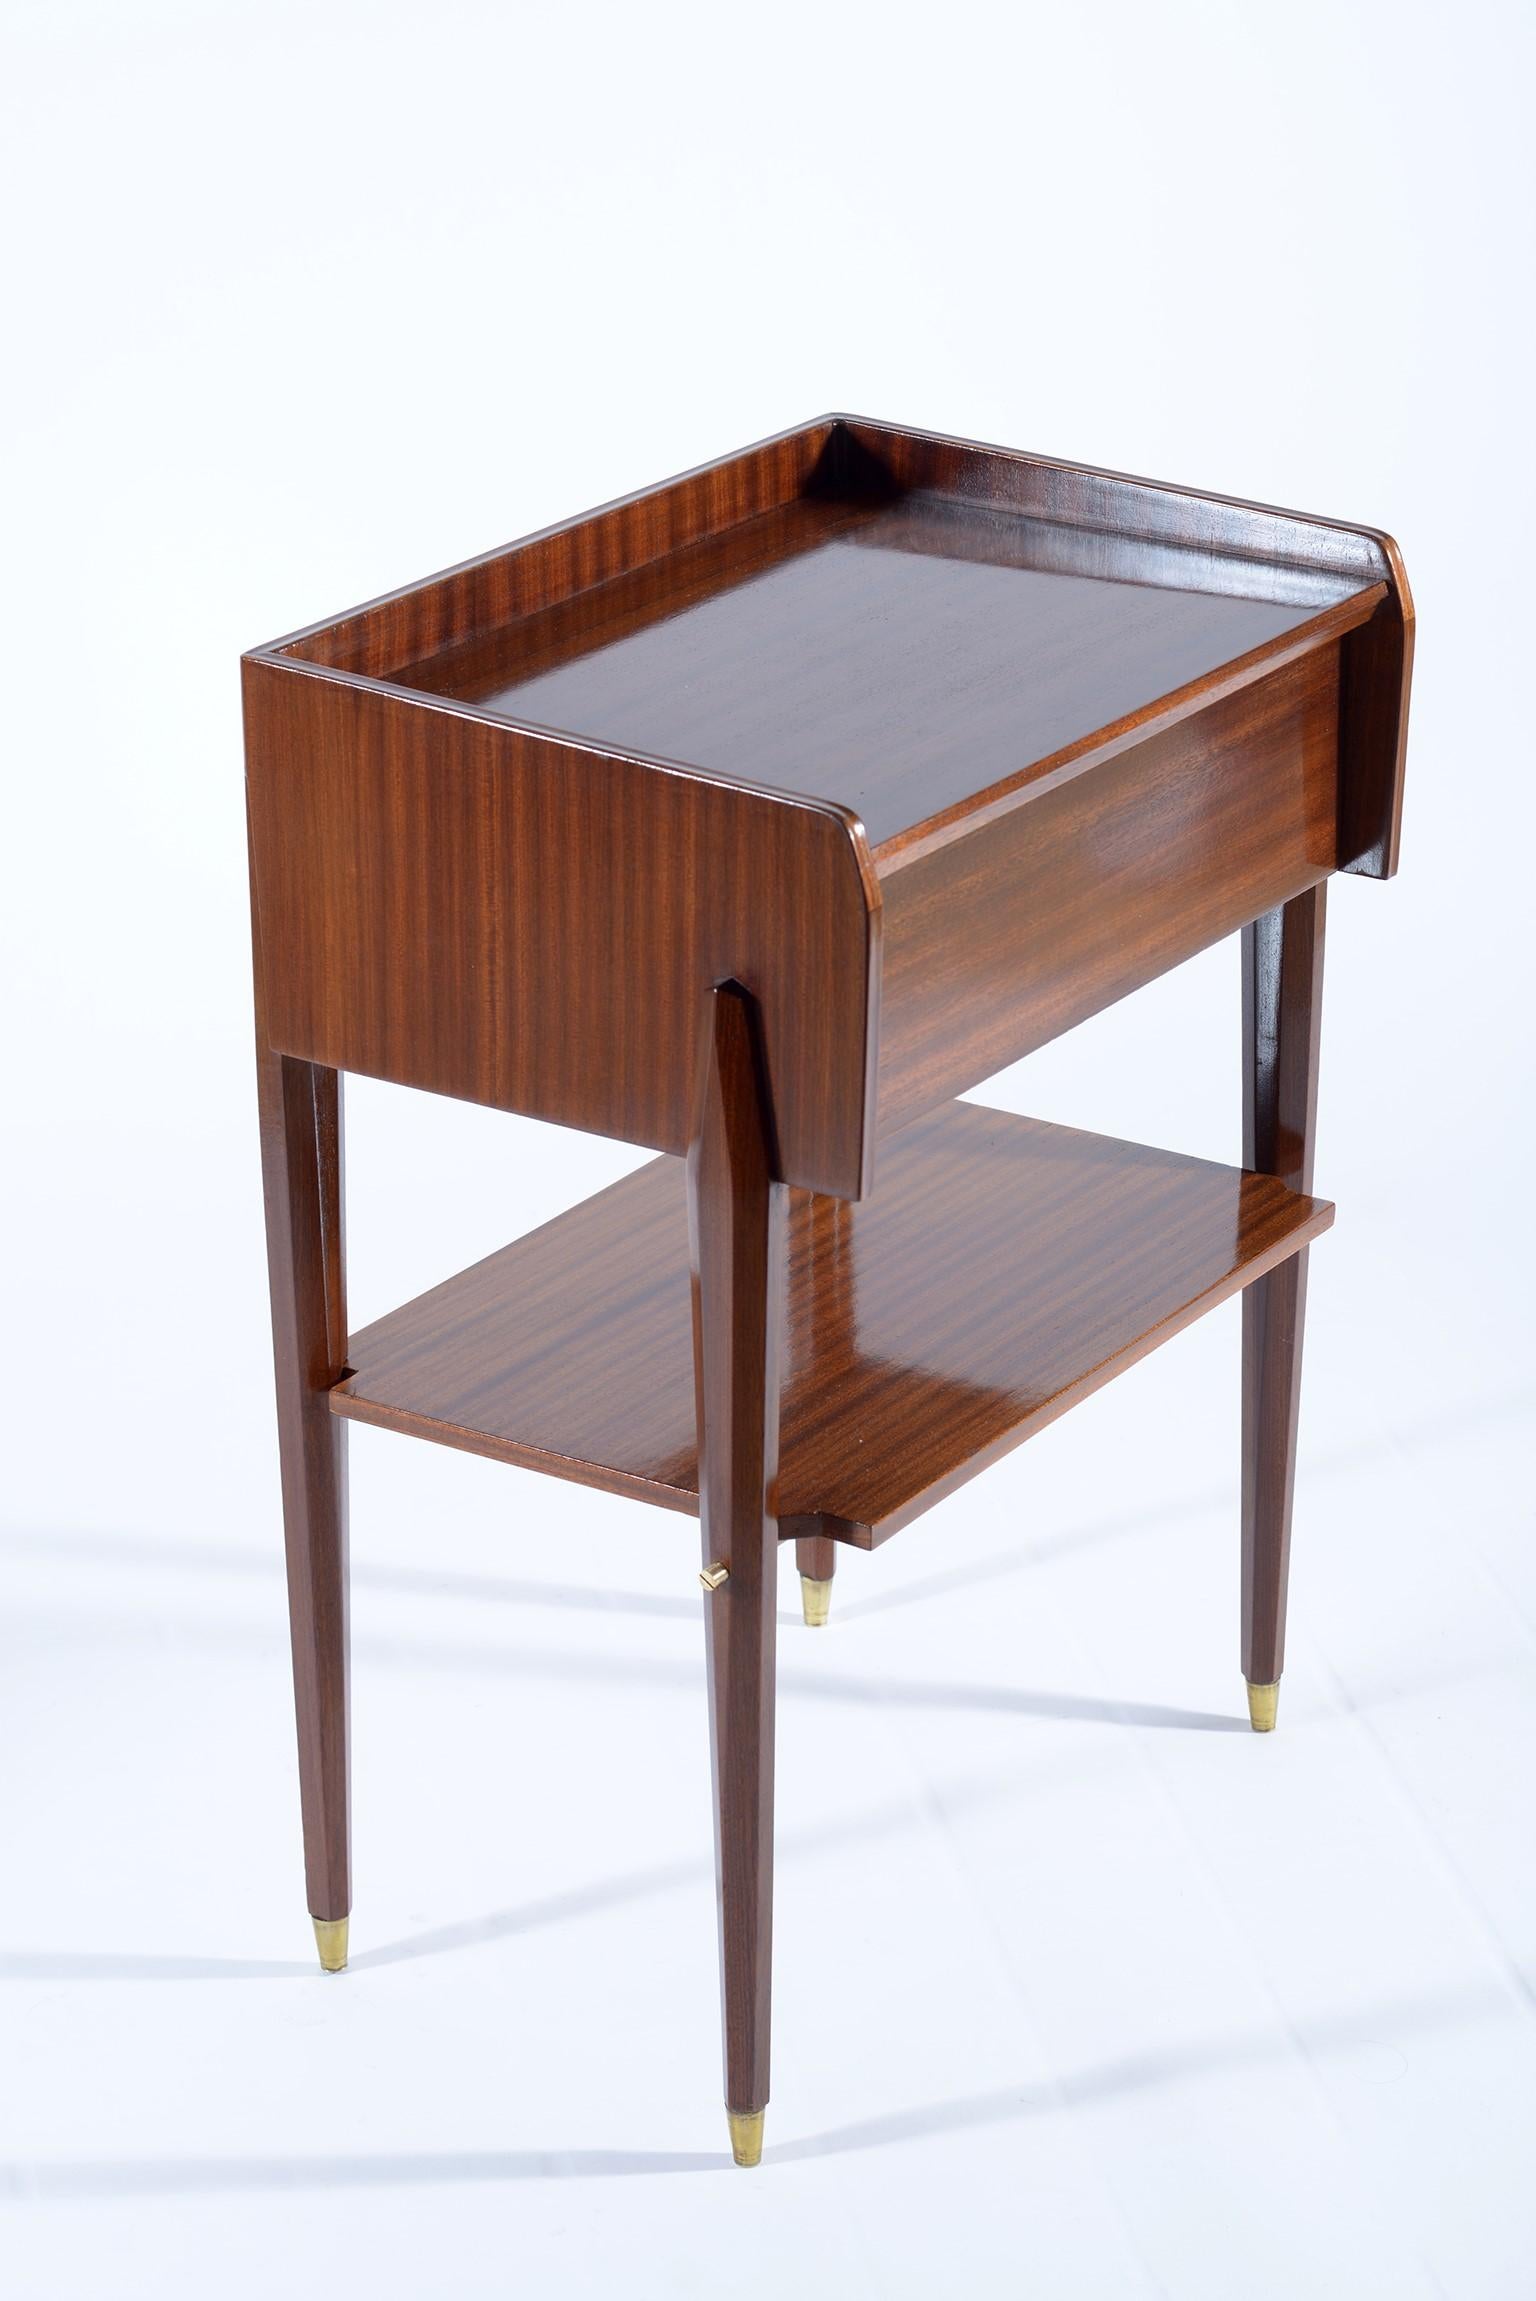 Pair of midcentury nightstands or side tables with drawers and additional shelve ,brass details and feet.
Designed Architect Pier Luigi Spadolini –Florence, Italy, late 1950s.
Pierluigi Spadolini (Florence, 5 April 1922 - Florence, 8 June 2000)